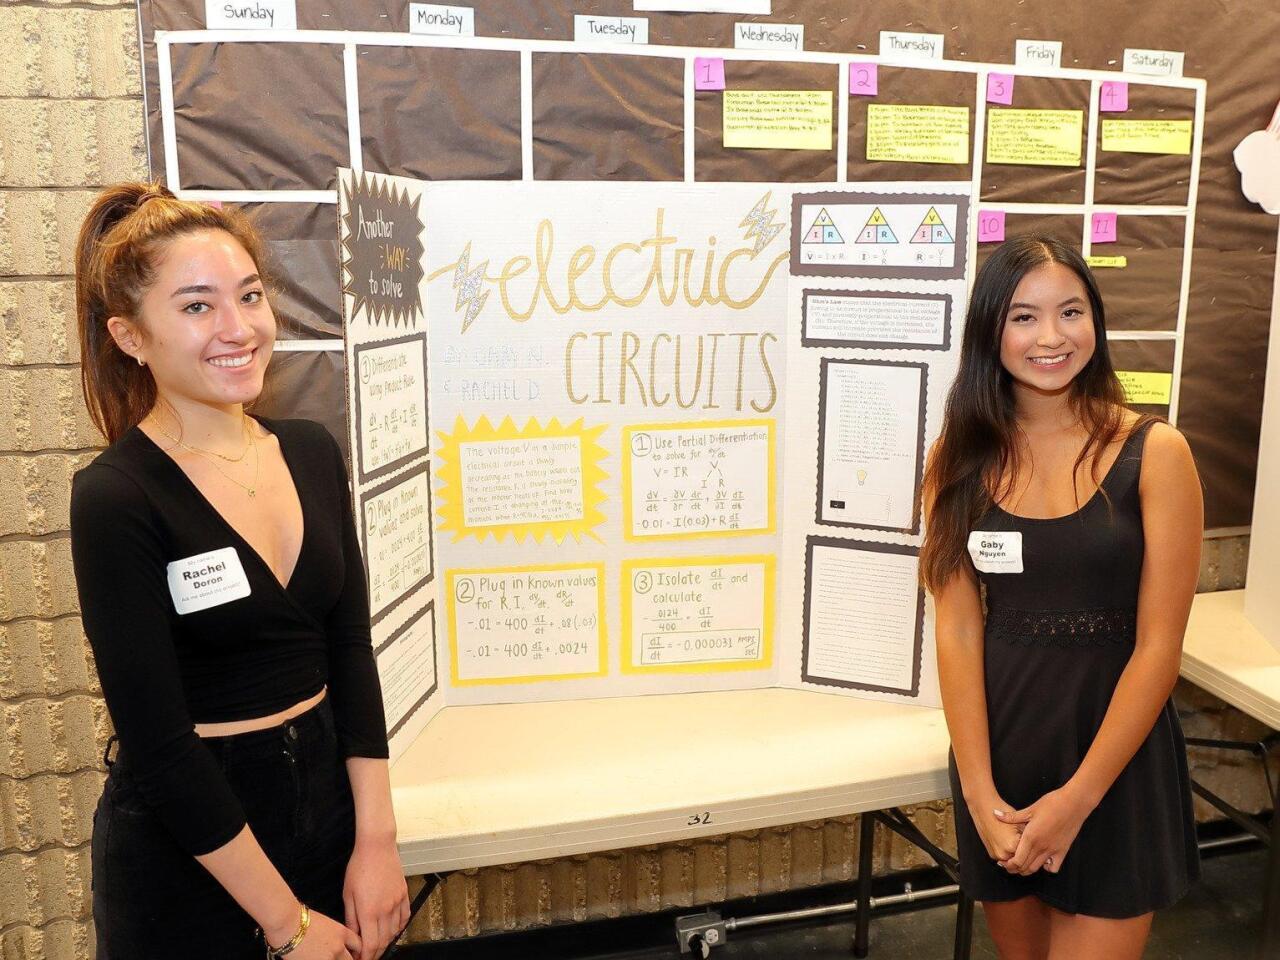 Rachel Doron and Gaby Nguyen with their project "Electric Circuits"